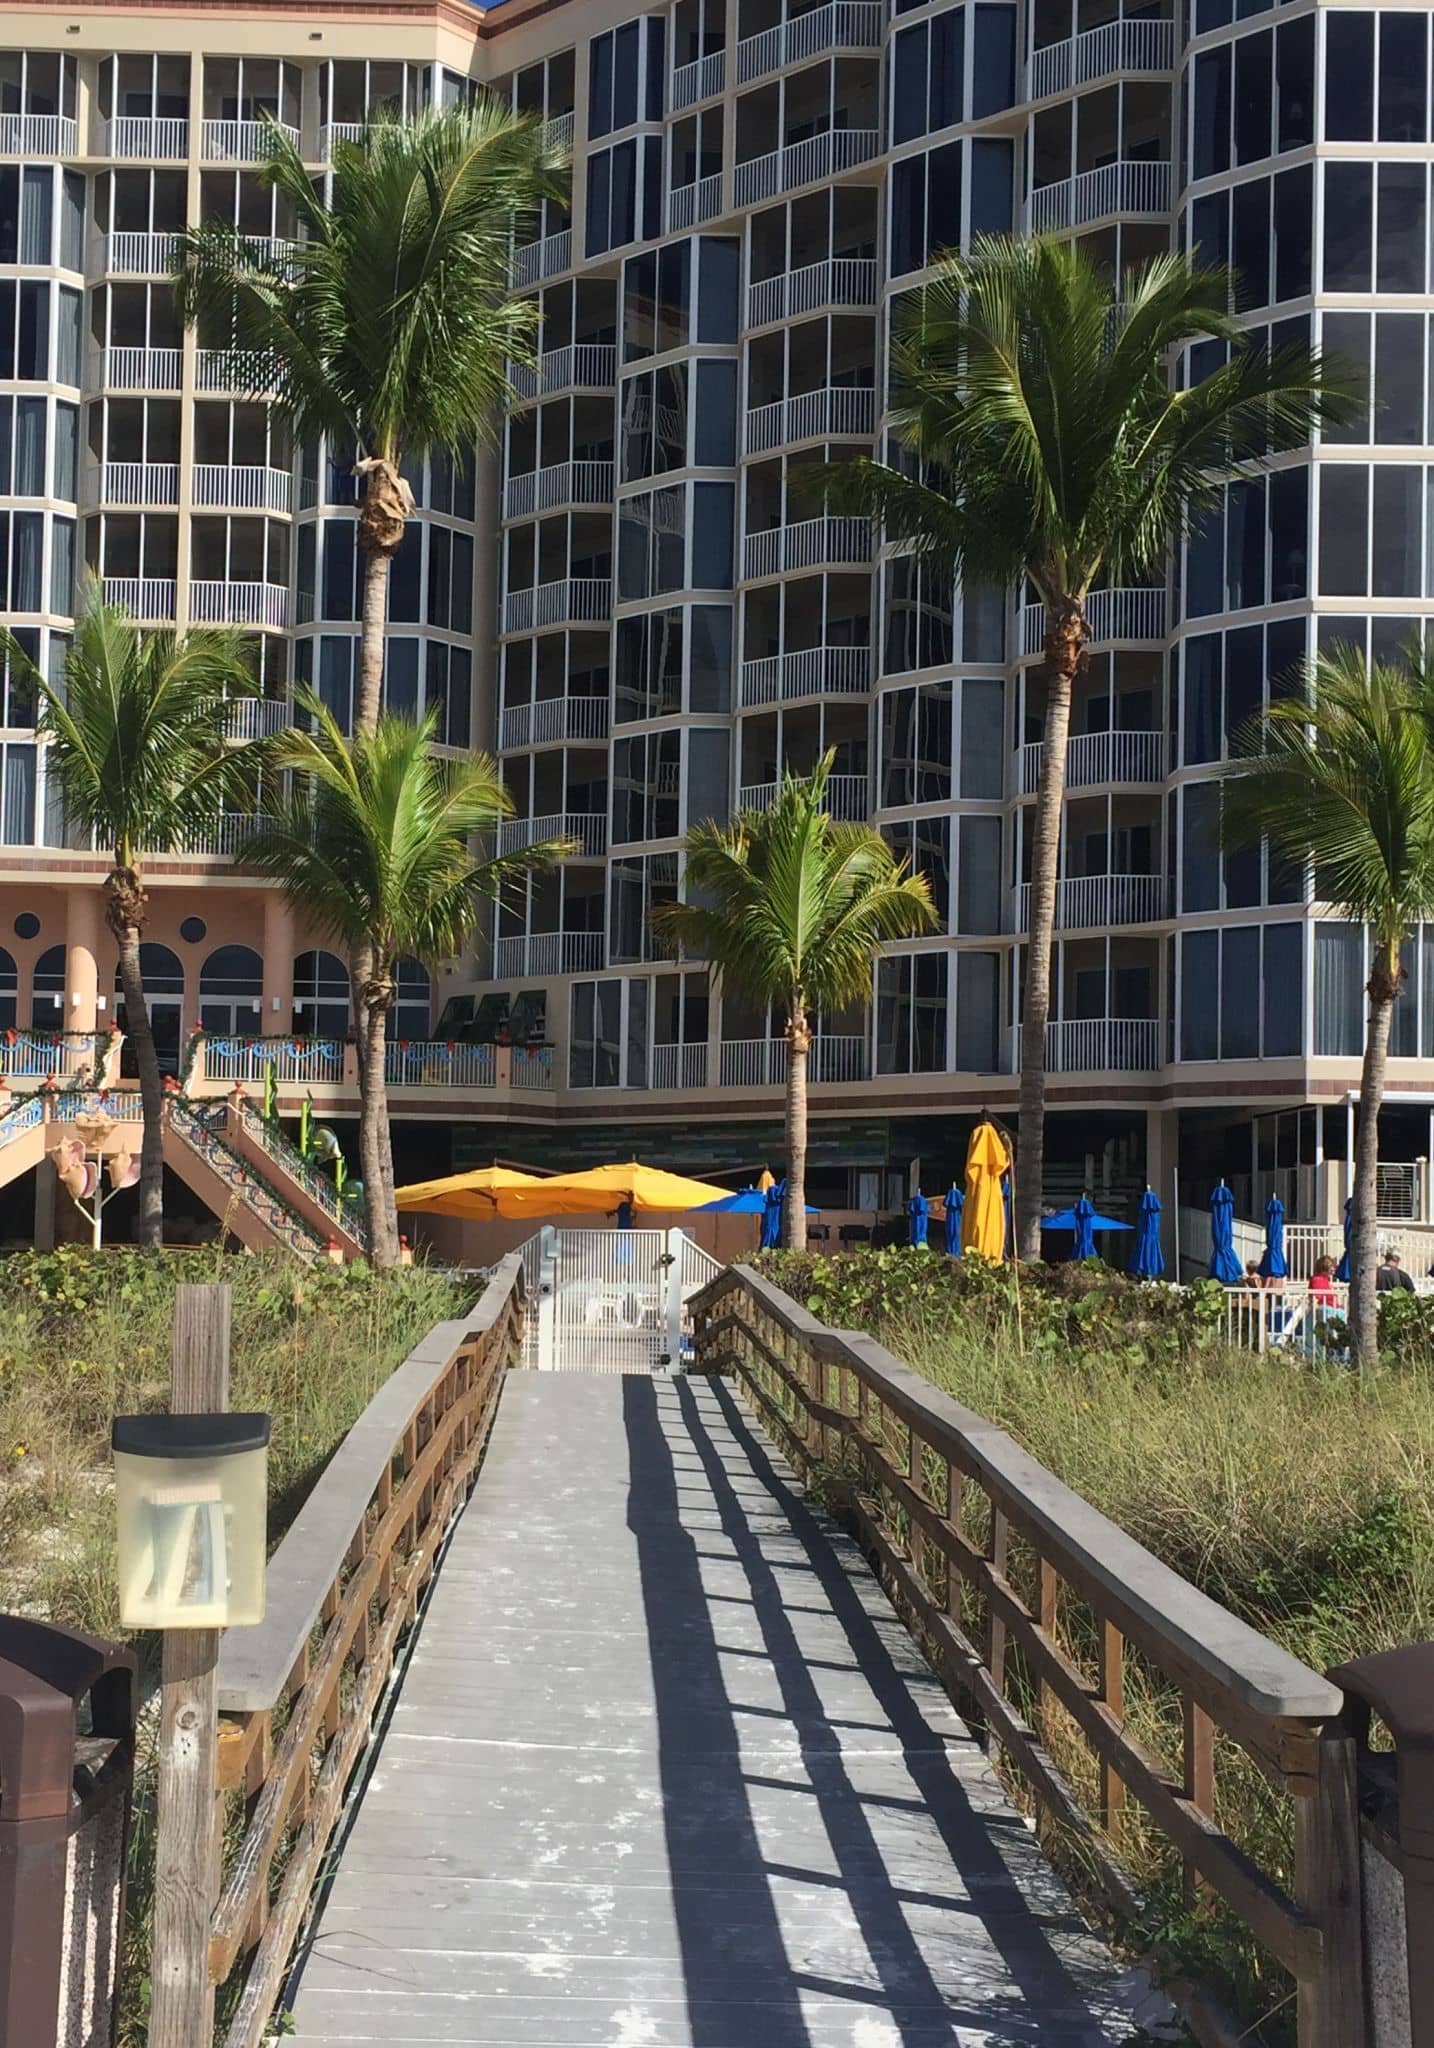 Enjoy Ft Myers Beach and the Pink Shell Beach Resort